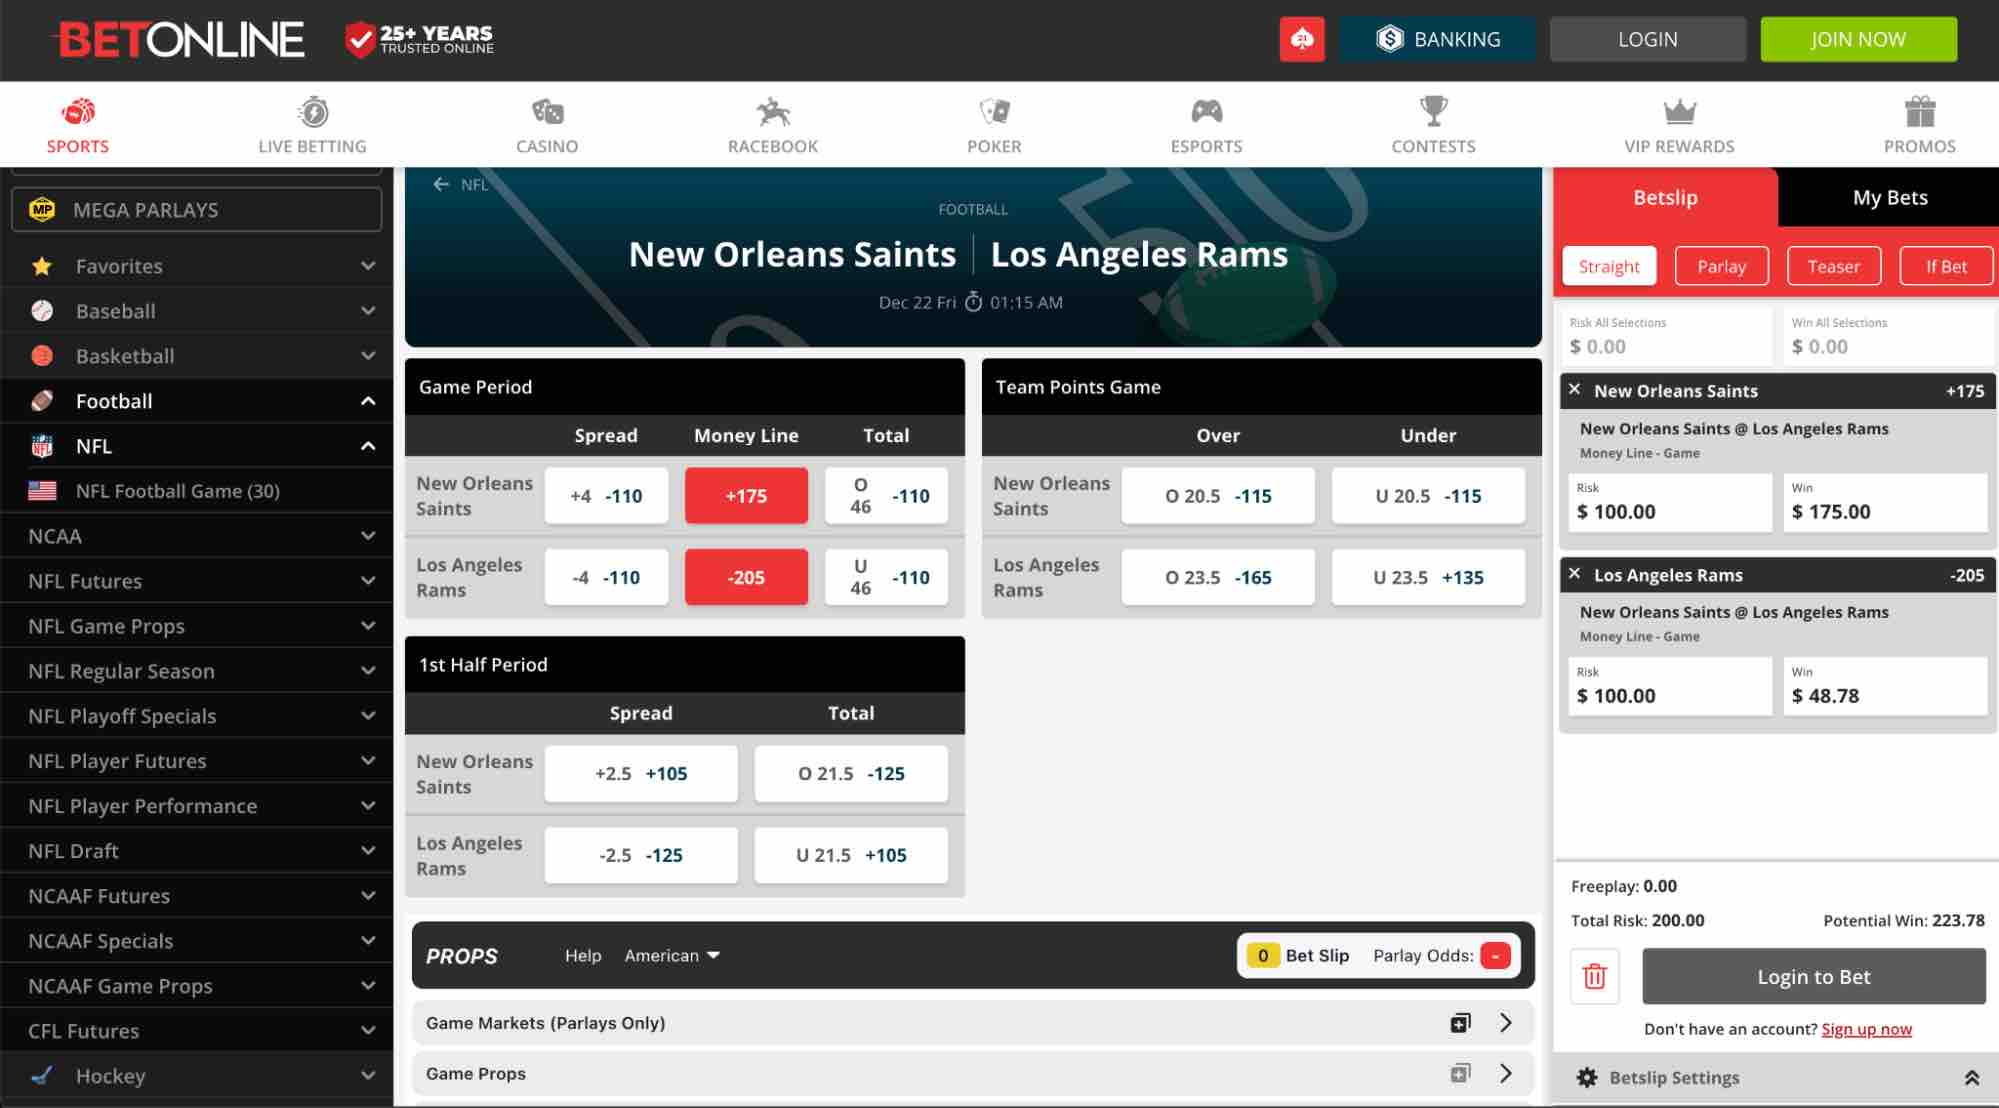 A screenshot of New Orleans Rams vs Los Angeles Rams betting markets with money line selections added to the betting slip